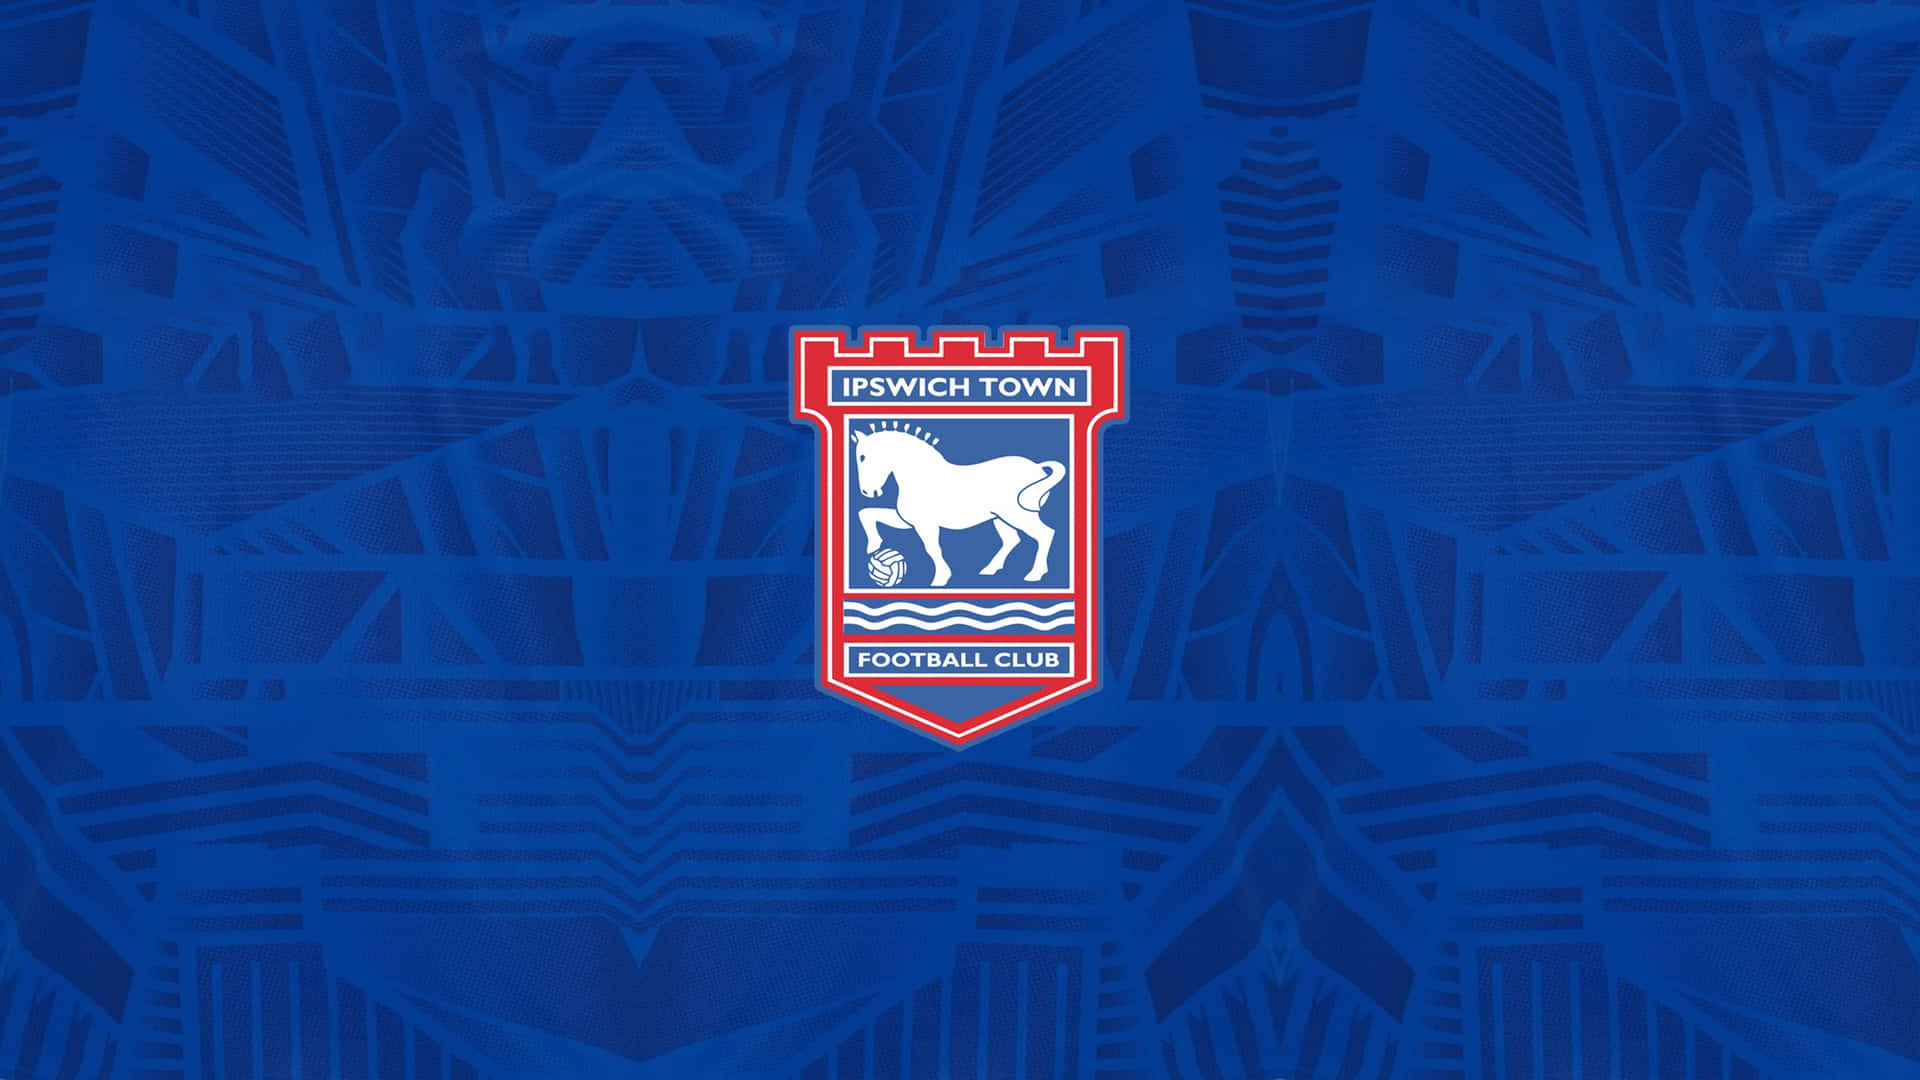 Ipswich Town Football Club Players Celebrating on the Field Wallpaper